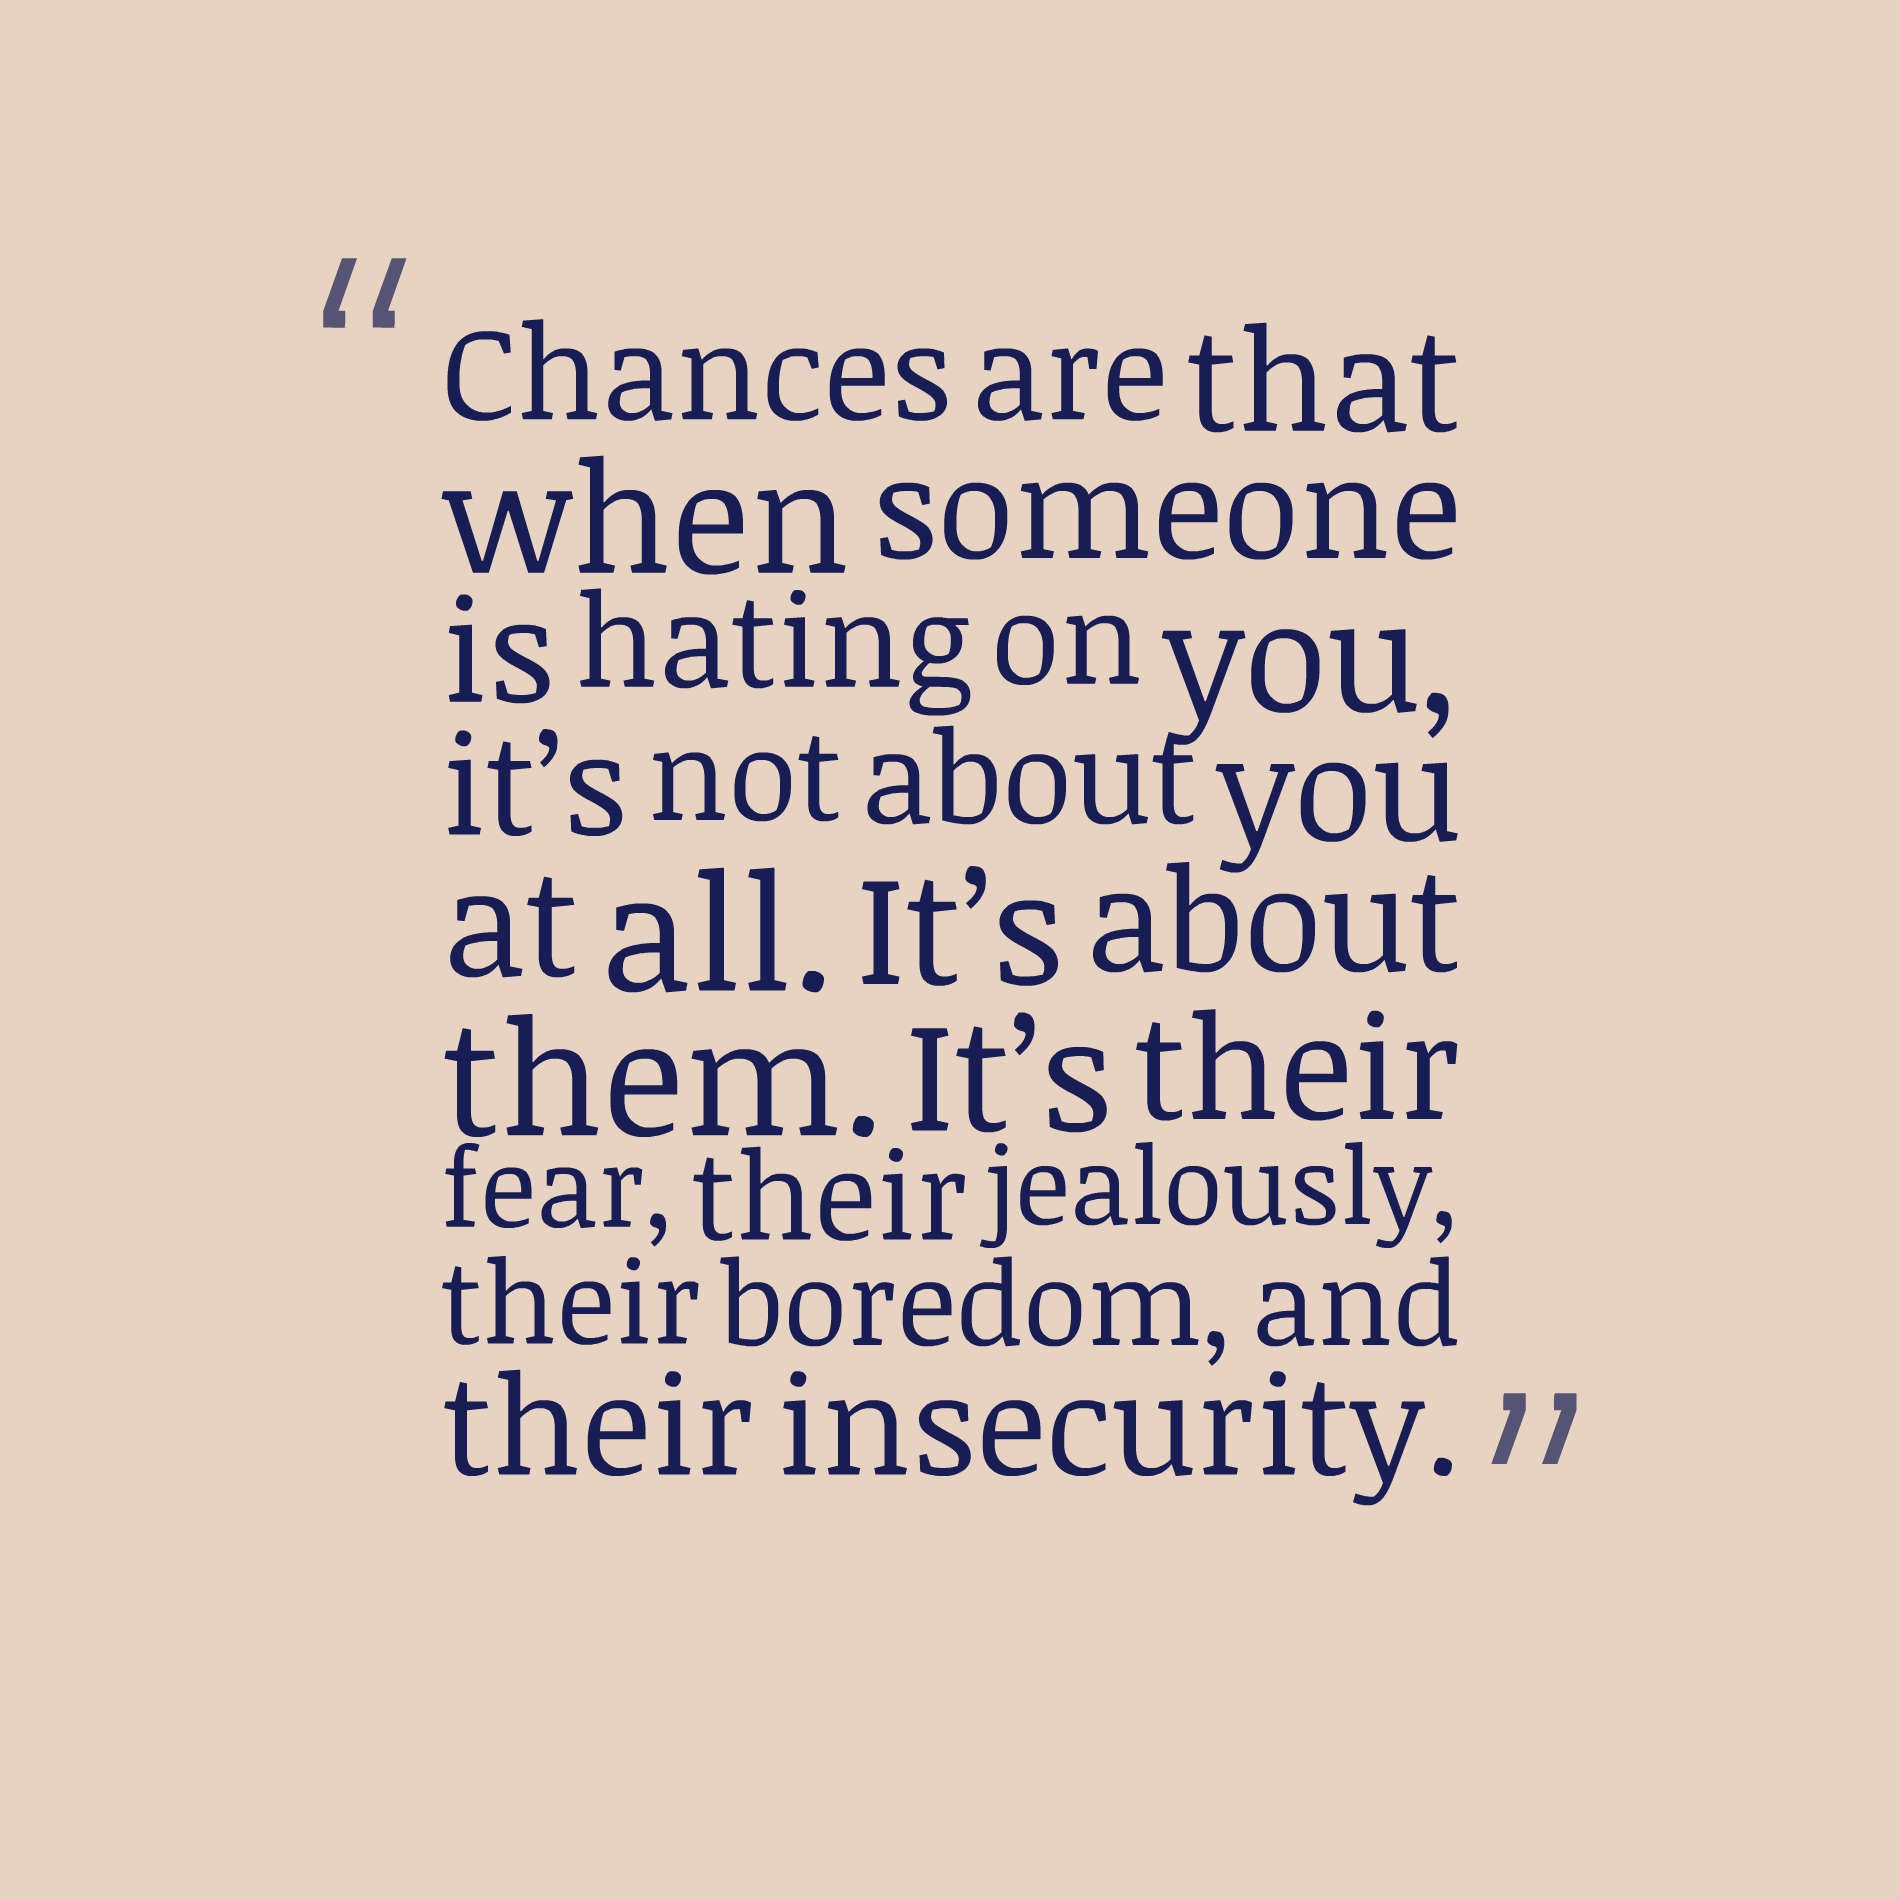 Chances are that when someone is hating on you, it’s not about you at all. It’s about them. It’s their fear, their jealousy, their boredom, and their insecurity.